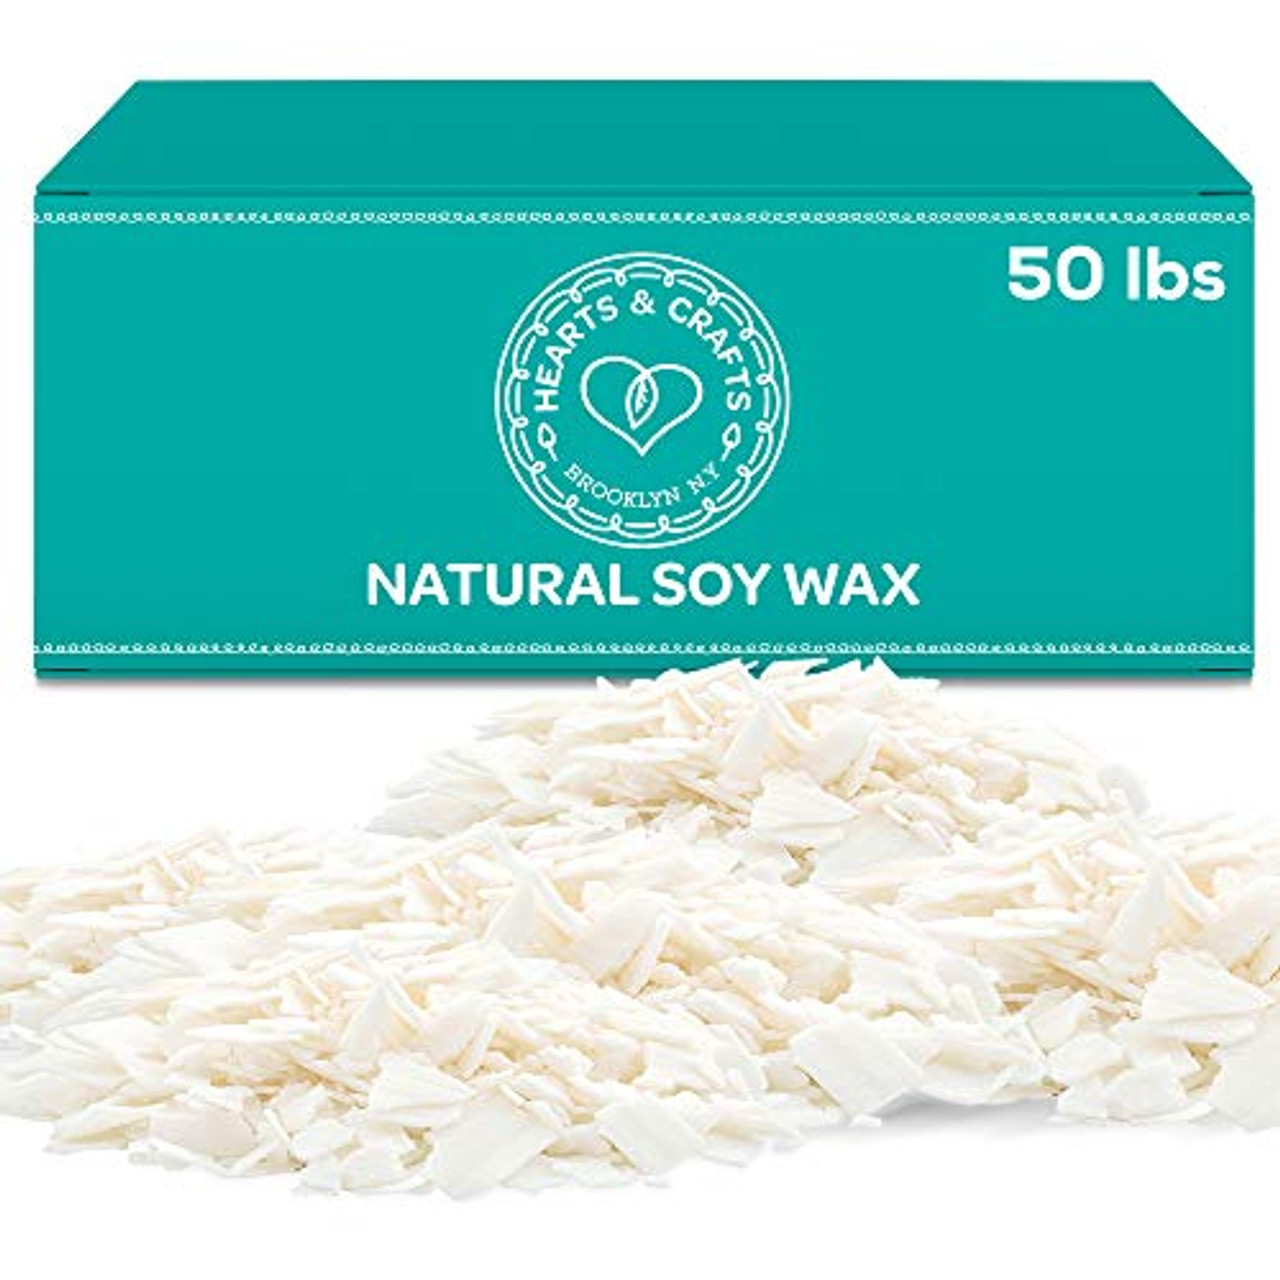 Soy Candle Wax - 50 lbs Candle Wax - Soy Wax for Candle Making and